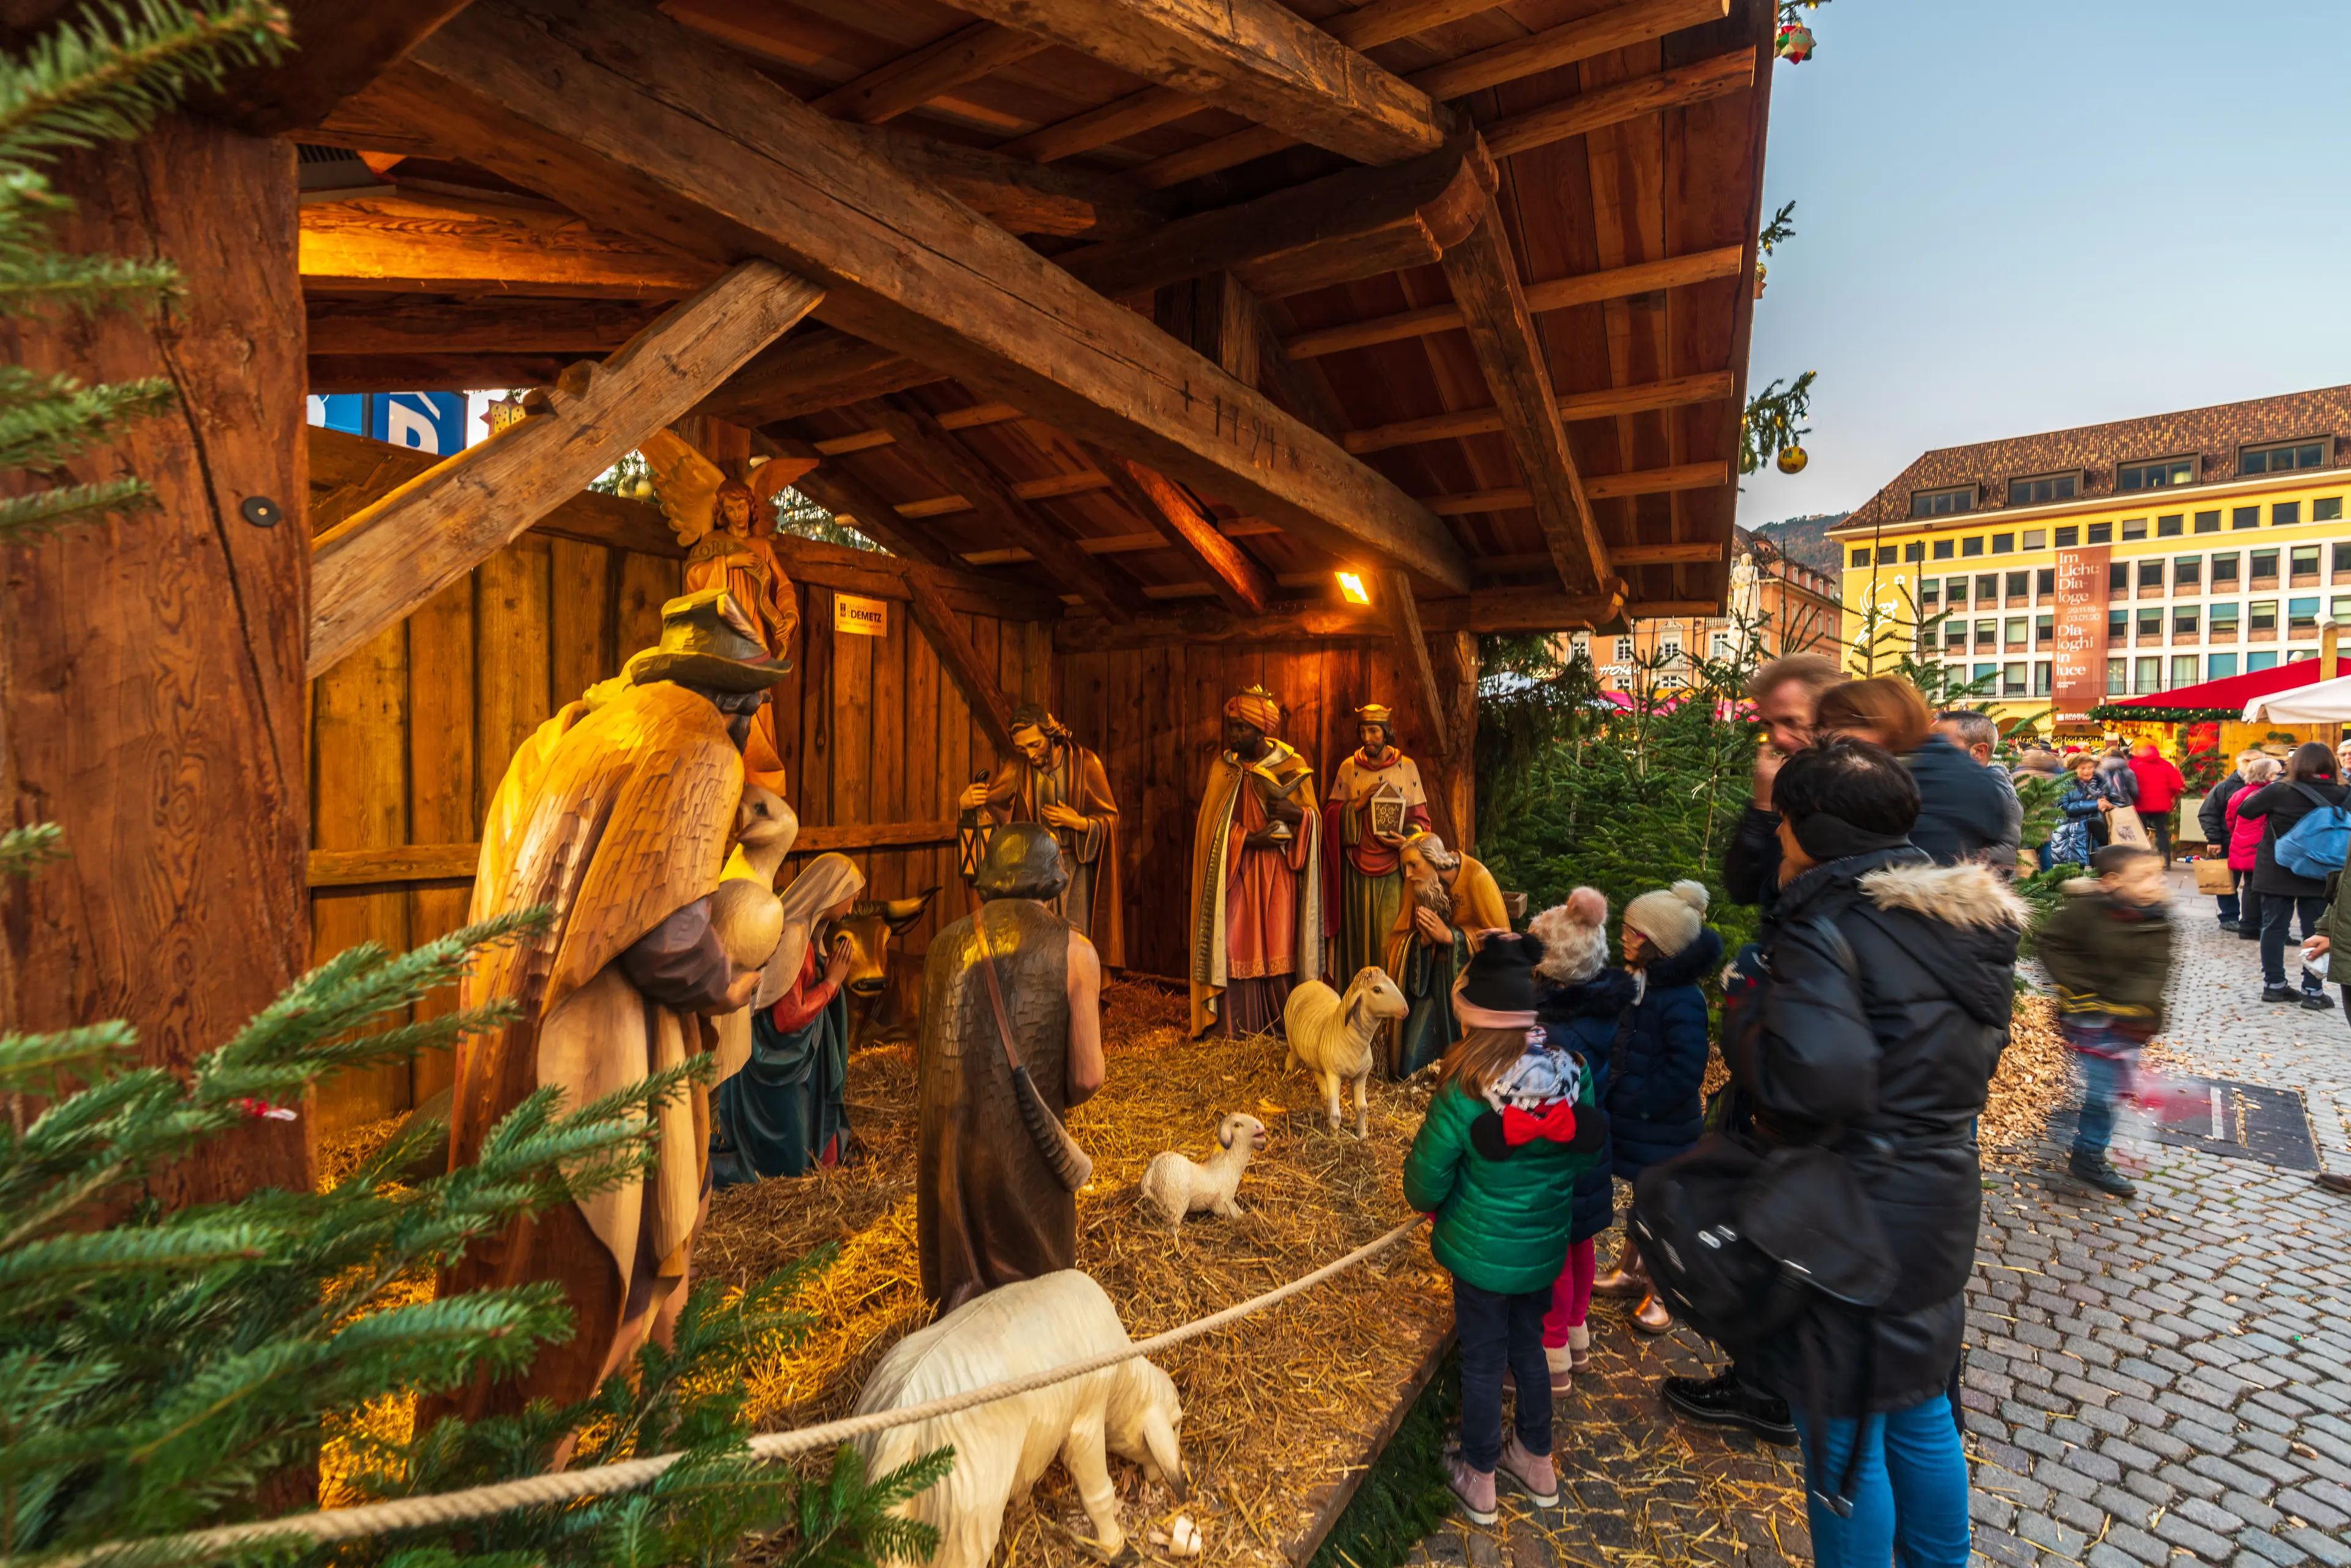 Decorations and Christmas market